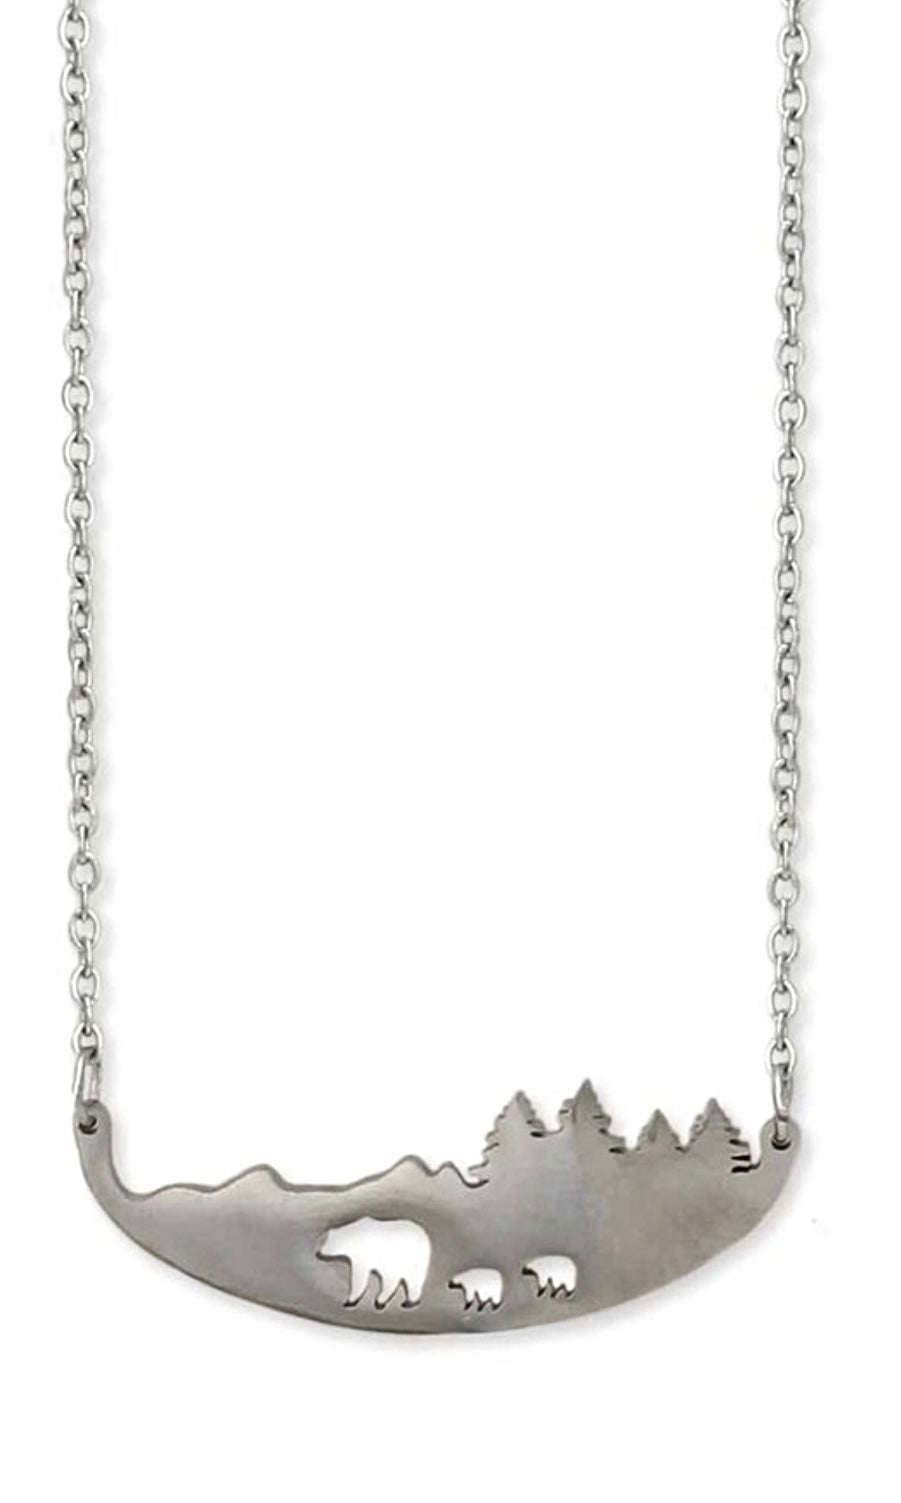 Necklace Mountain Mama Silver Cutout Charm Necklace